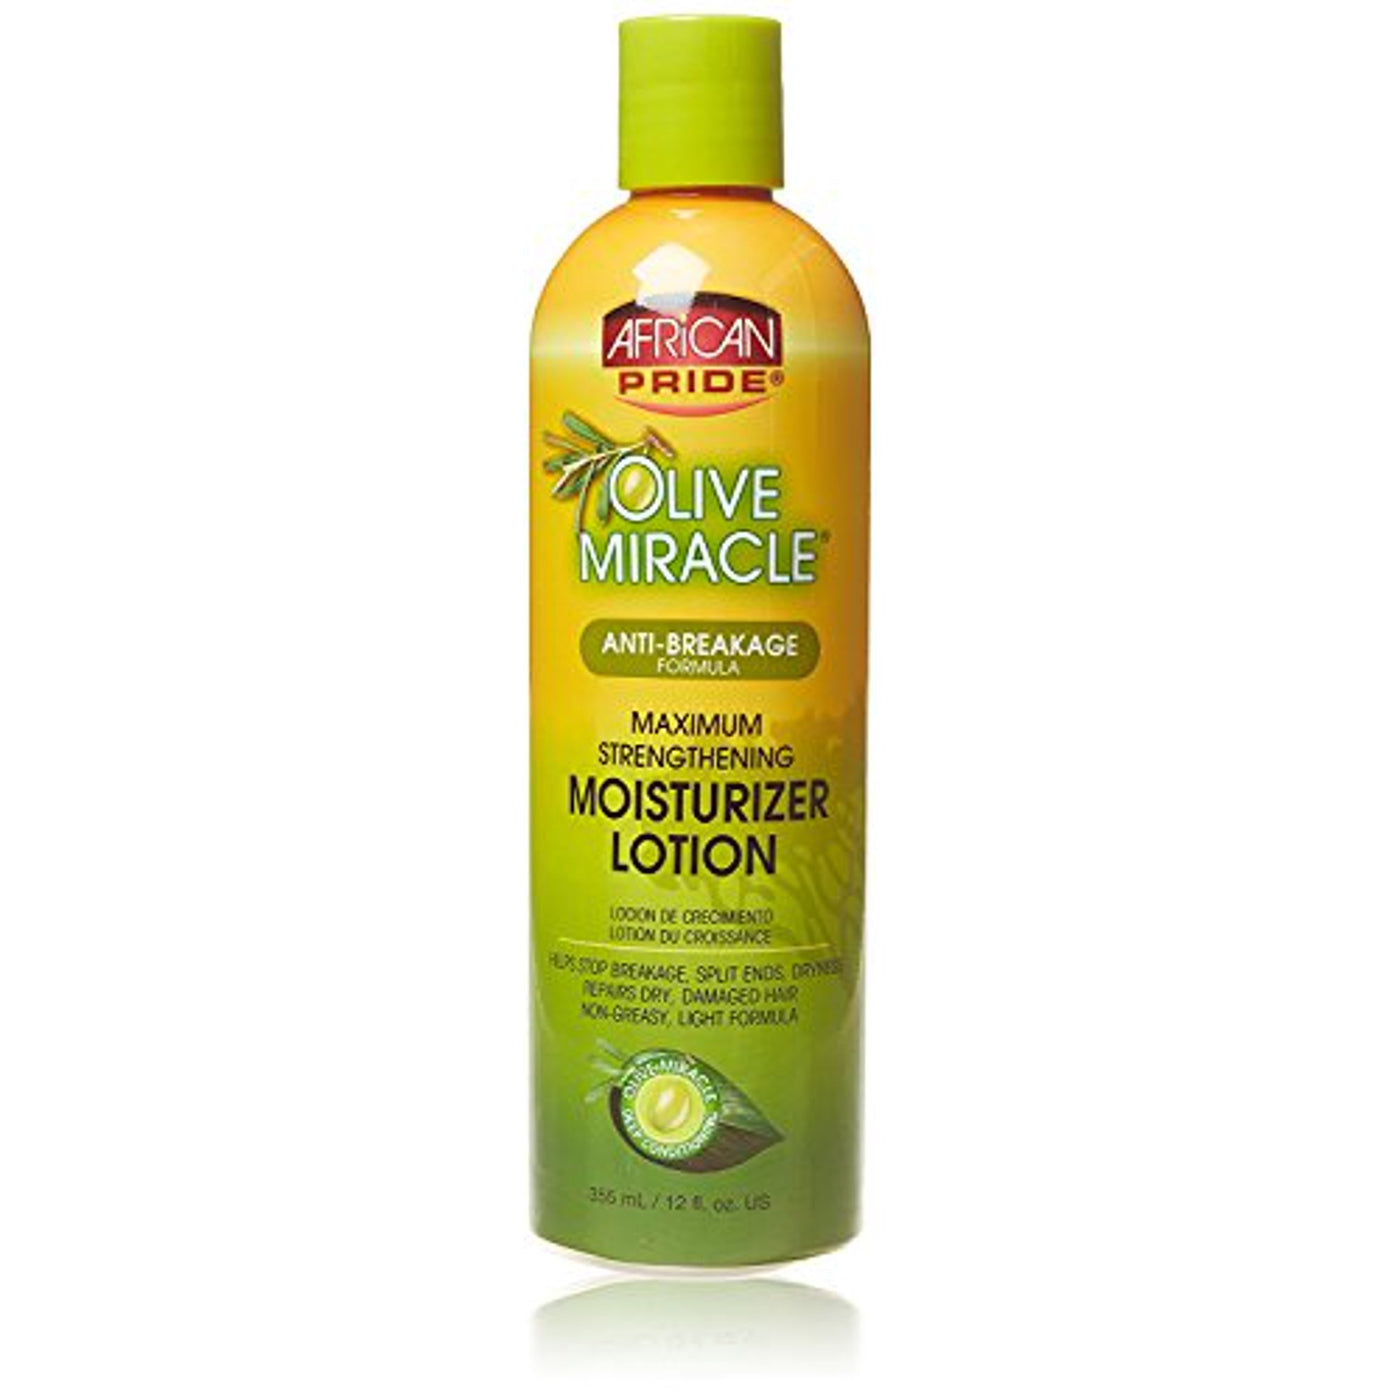 African Pride Olive Miracle Moisturizer Lotion 12oz - Sfbeautybar